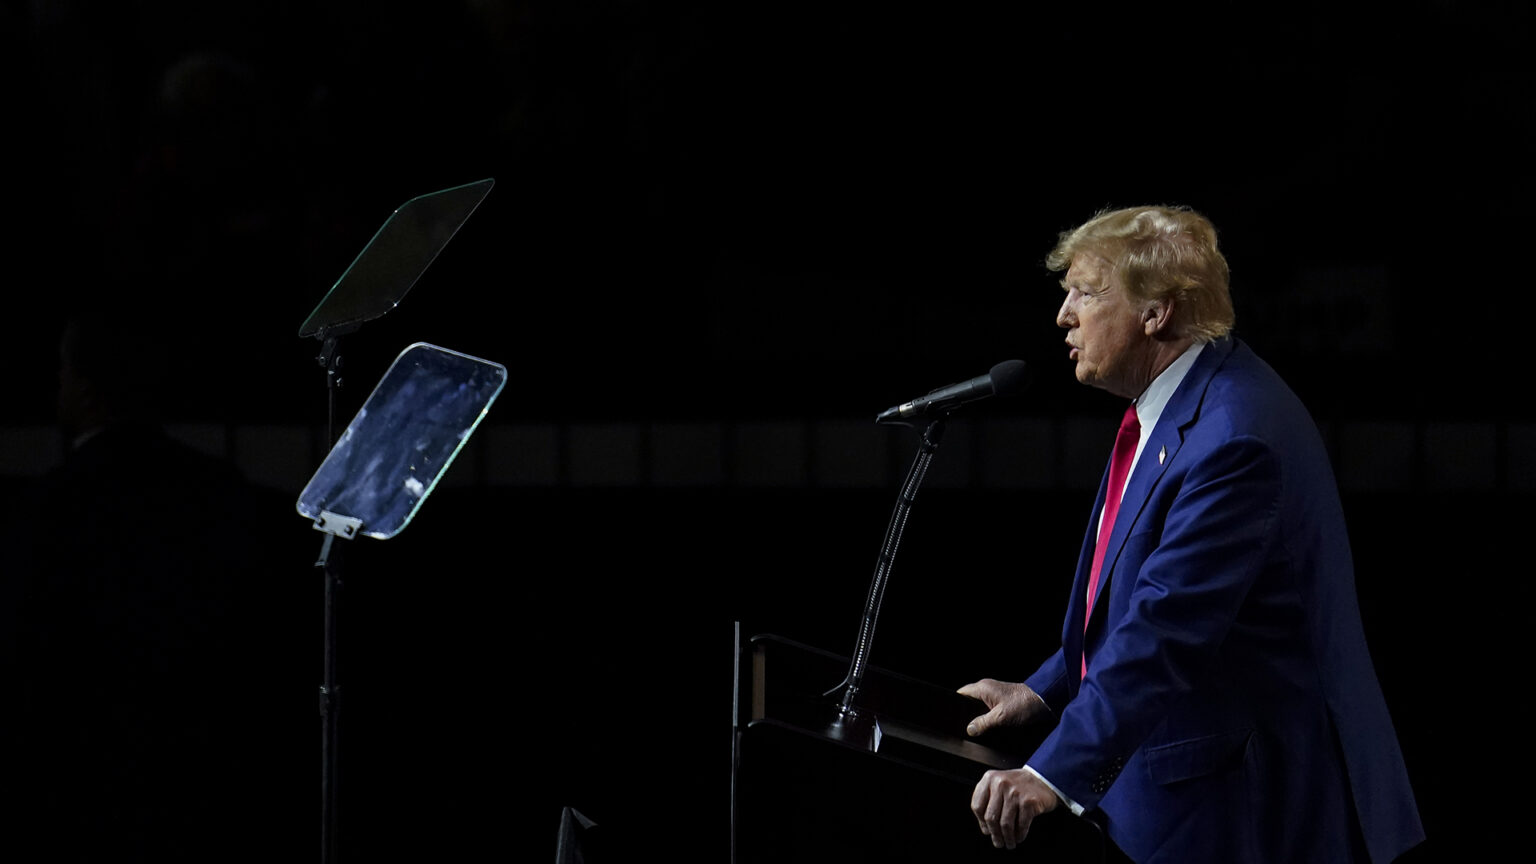 Donald Trump speaks into a microphone mounted to a podium which he is holding with both hands while reading from two teleprompters.